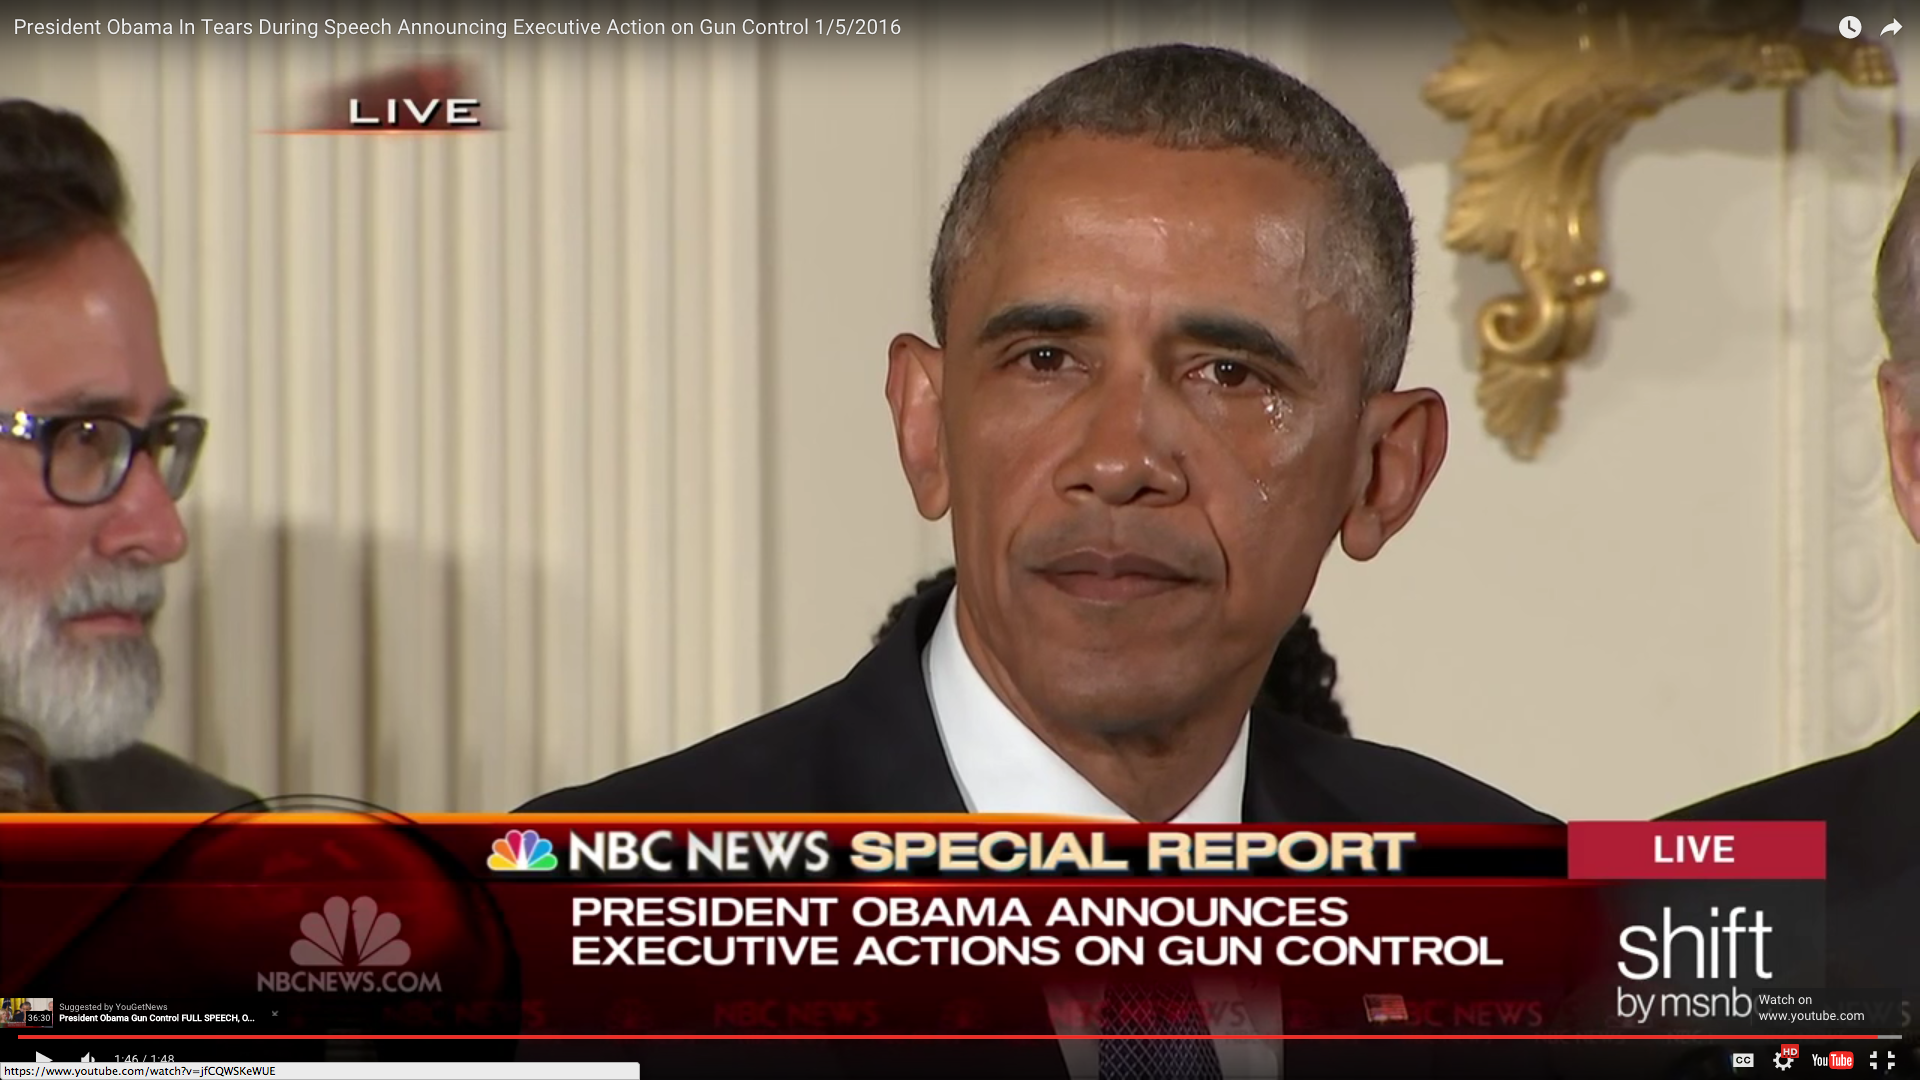 President Obama becomes emotional when talking about violent deaths by guns.